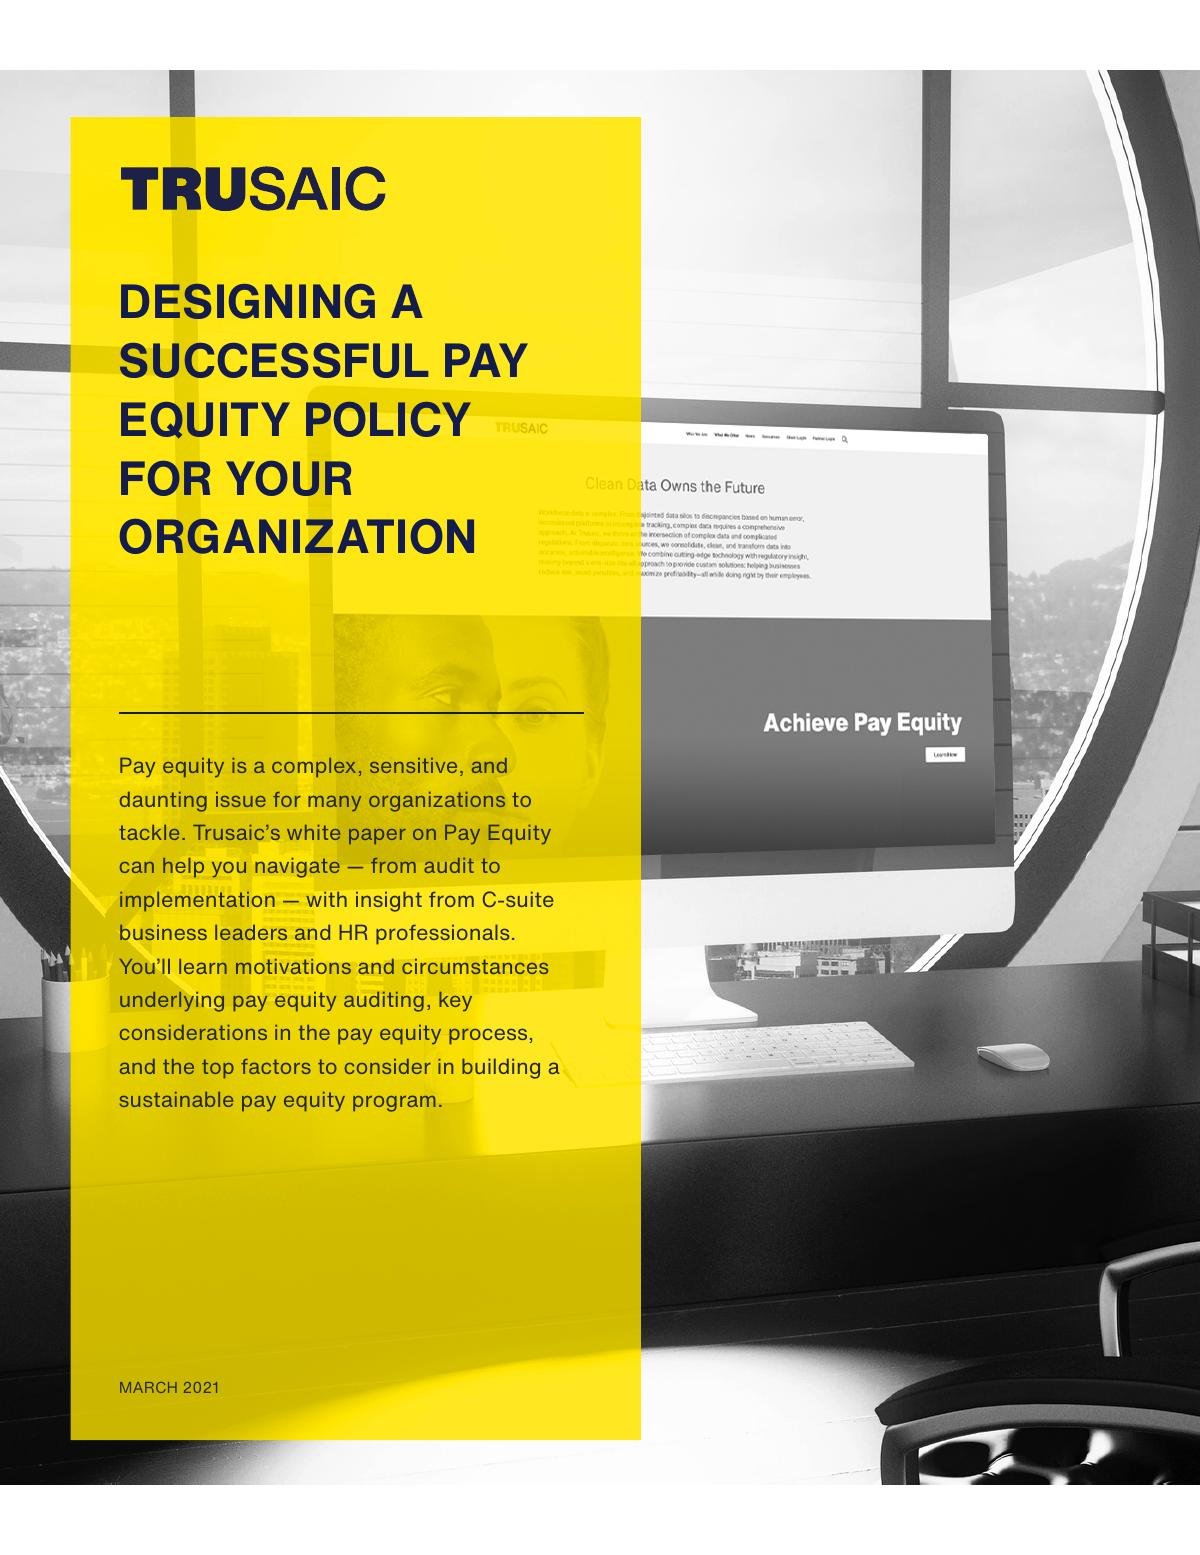 Designing a Successful Pay Equity Policy for Your Organization